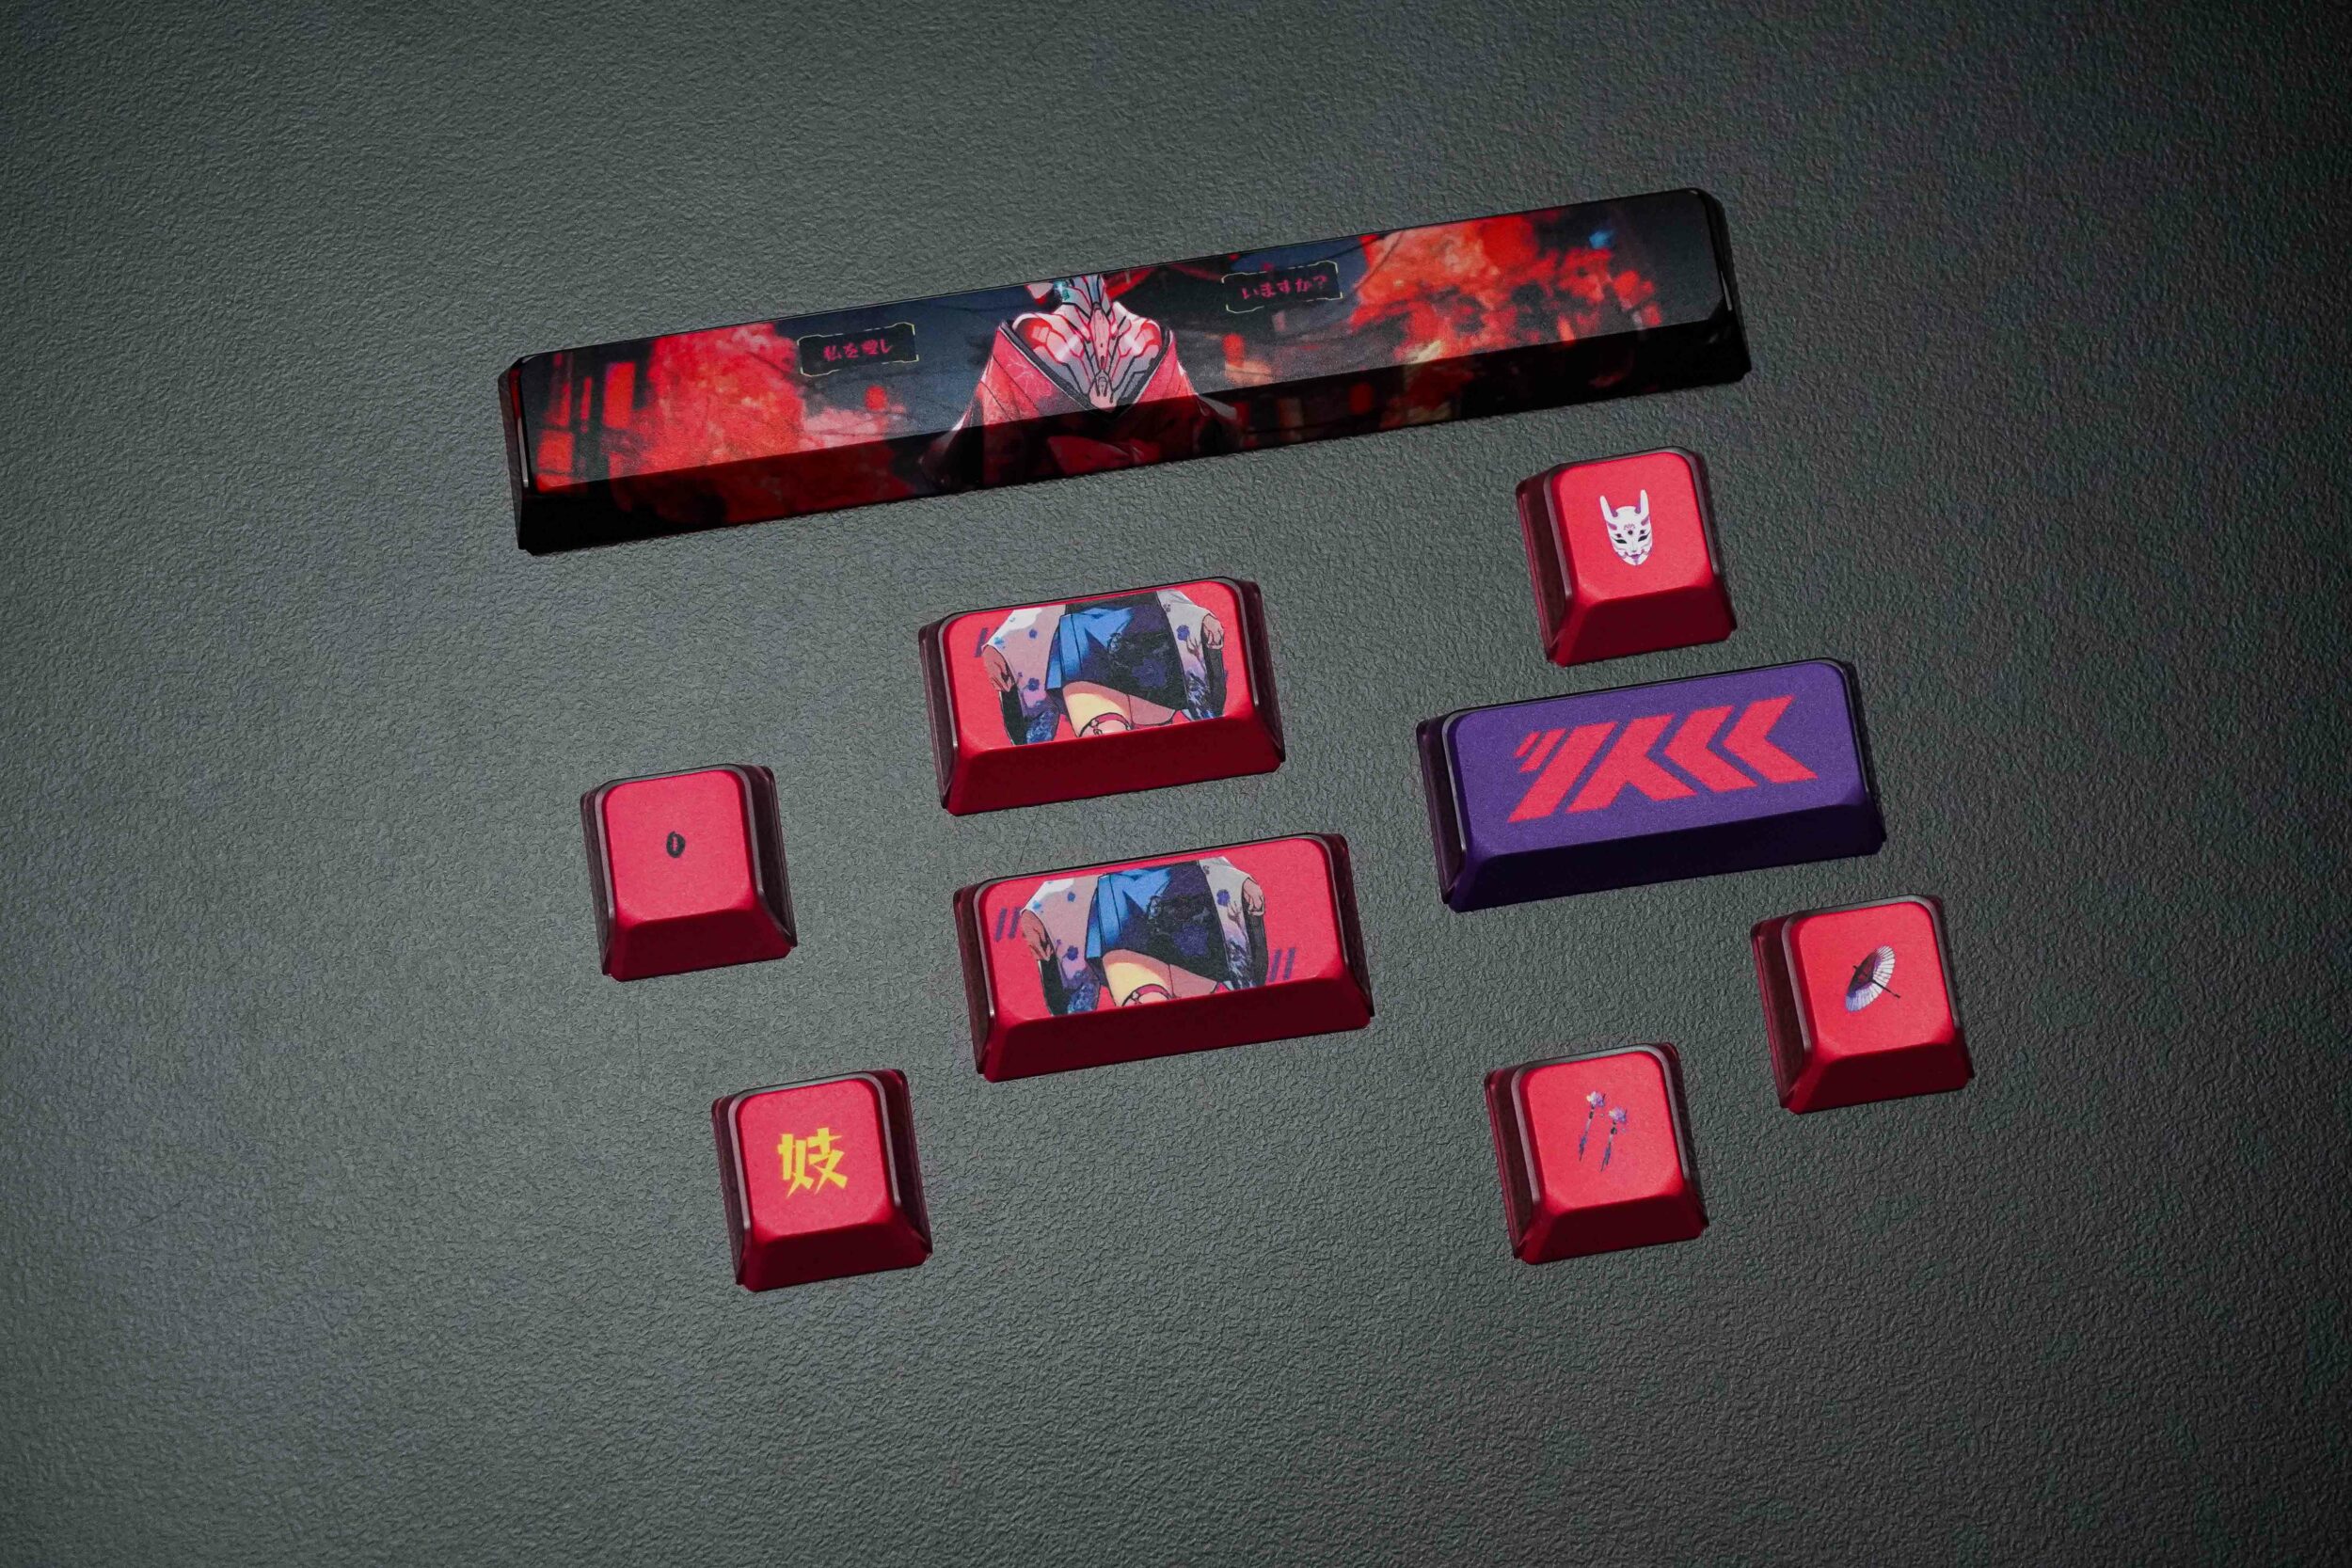 Extra Keycaps For Different Layouts